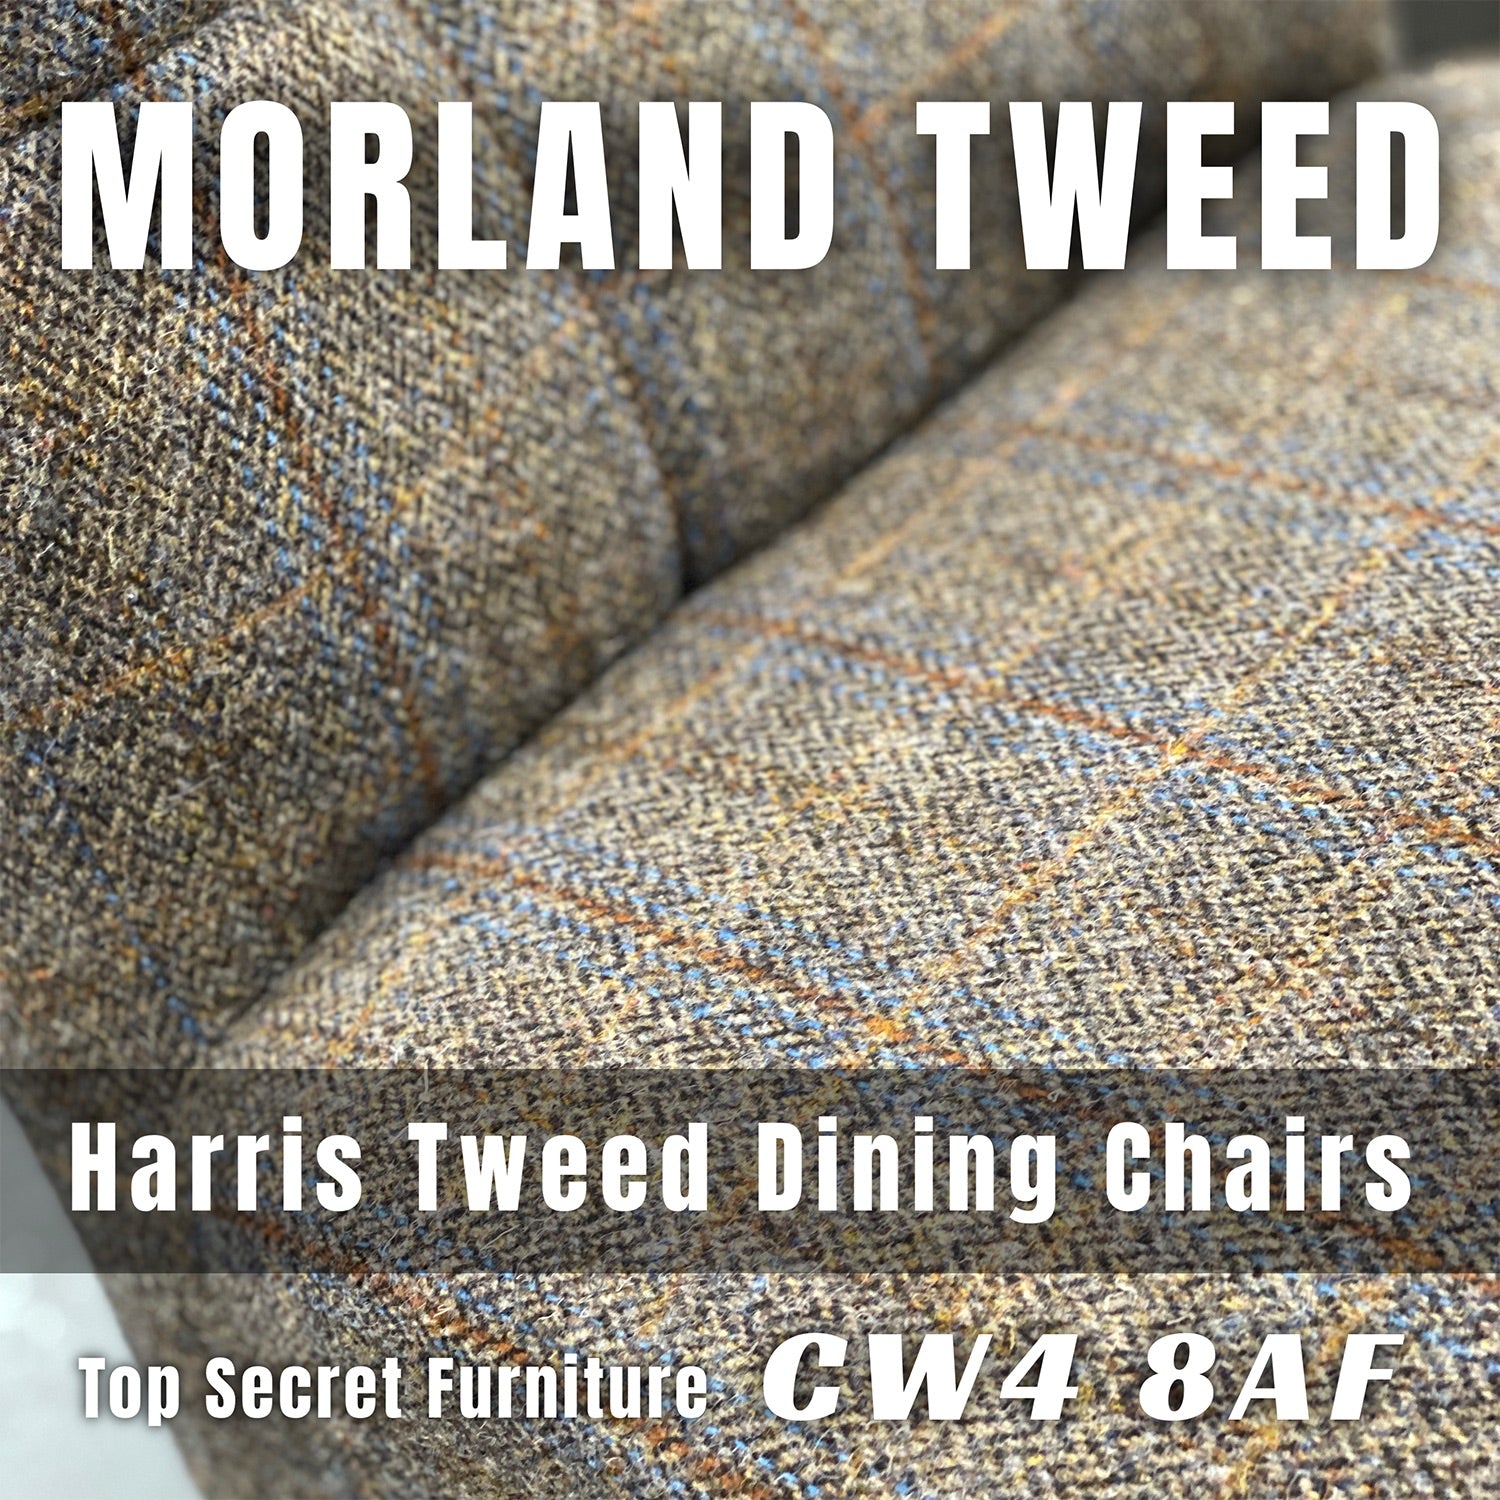 Colin Harris Morland Tweed Dining Chairs from Top Secret Furniture